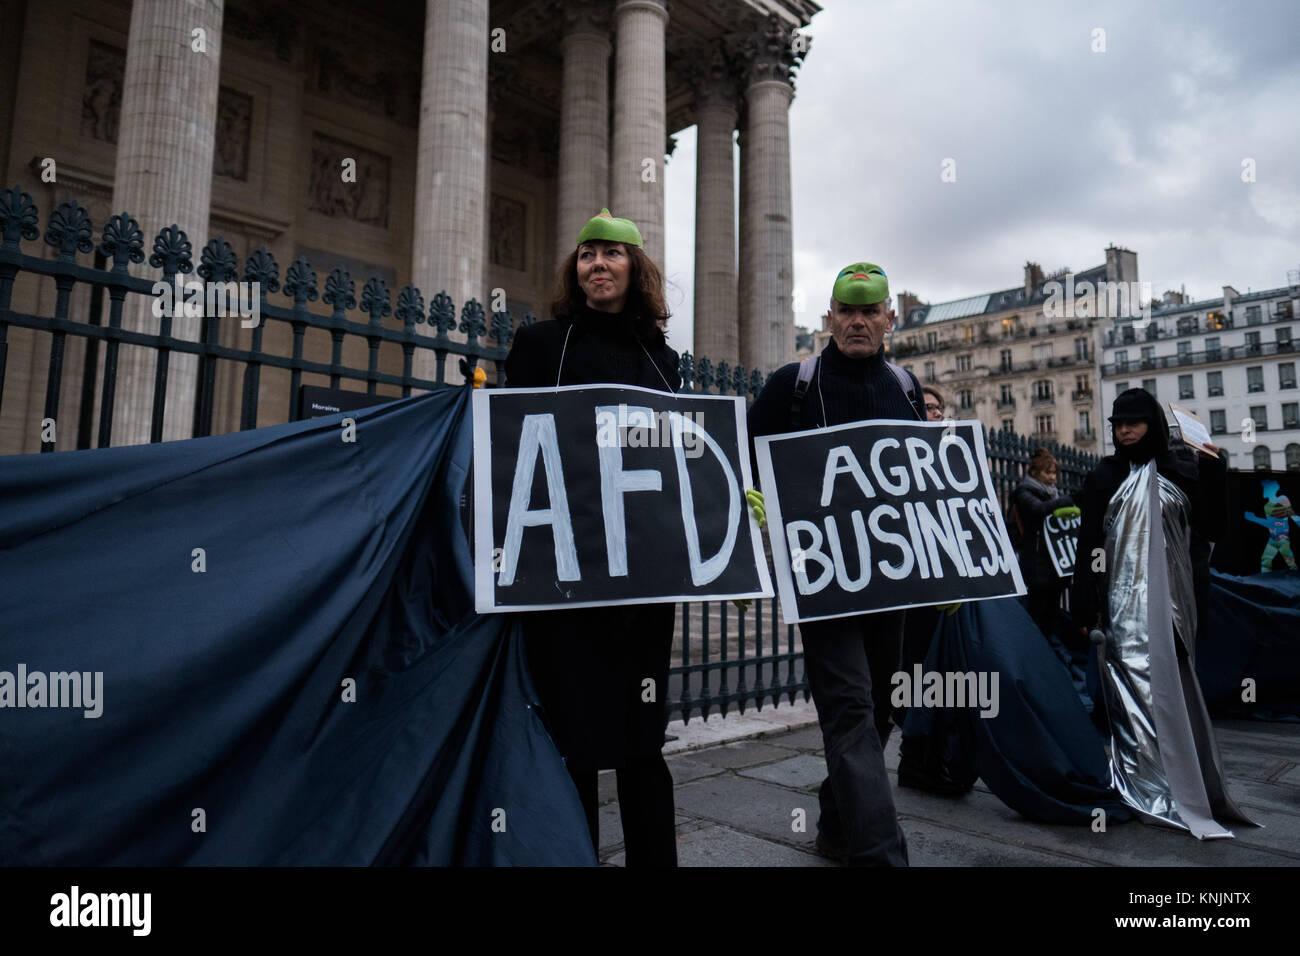 Paris, Ile de France, France. 12th Dec, 2017. Protesters prepare for the incoming action, displaying placards calling out the AFD (French Agency for Development) and the agro industry. Answering a call from 350 France, Tour Alternatiba, Les Amis de la Terre France, ANV Action non-violente COP21, Attac France (Officiel), Bizi Mugi, le CRID, le Réseau Action Climat, la Fondation pour la Nature et l'Homme, Oxfam France, Refedd et ZEA, several hundred protesters gathered in front of the Panthéon in Paris for happening. They symbolically tore down the 'wave of energies from the pa Stock Photo